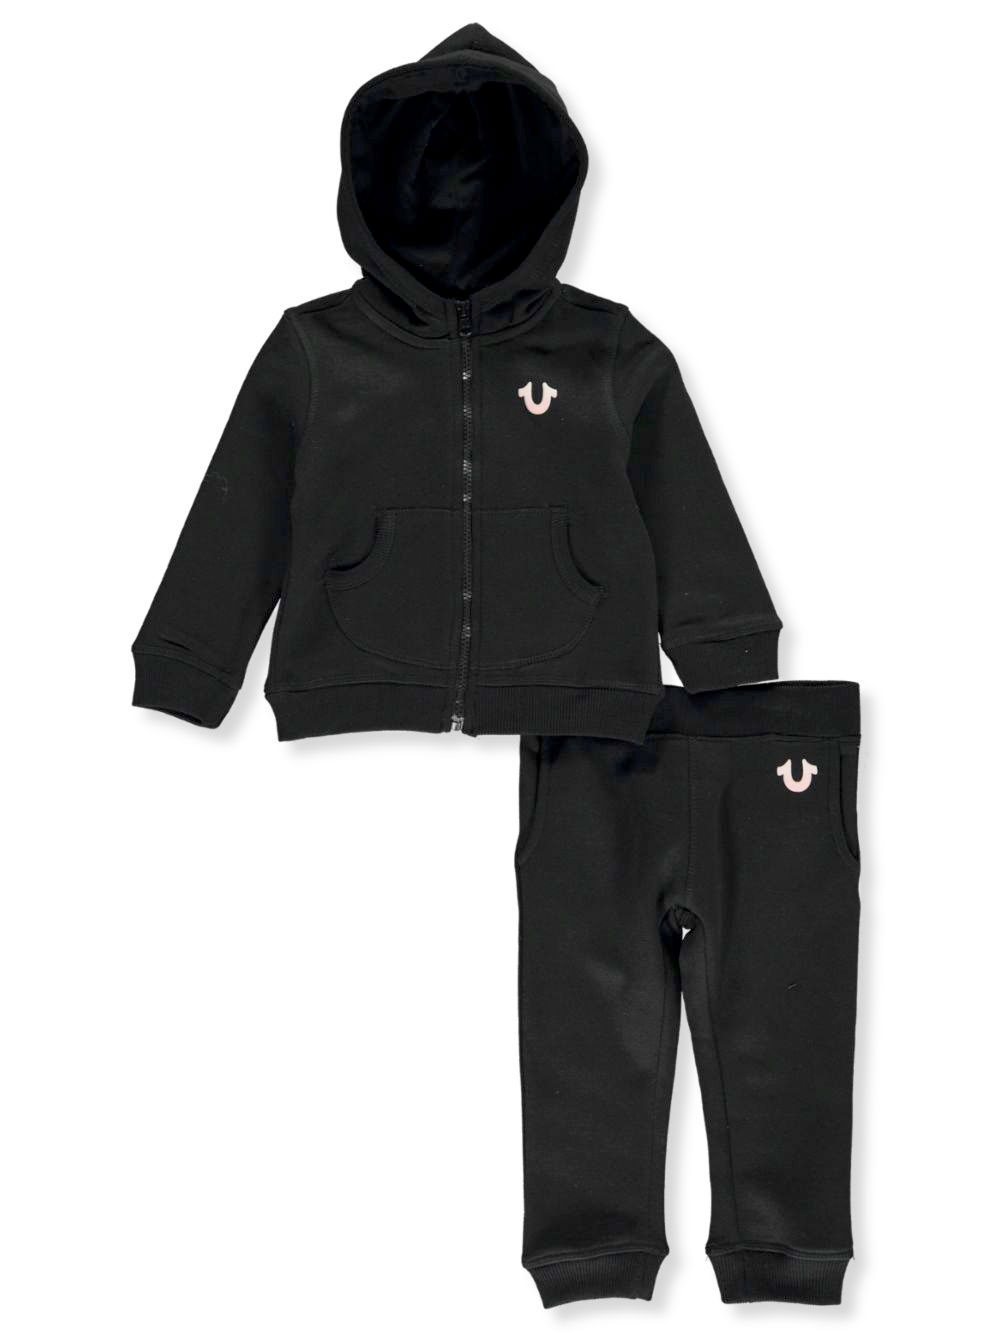 baby girl true religion outfit